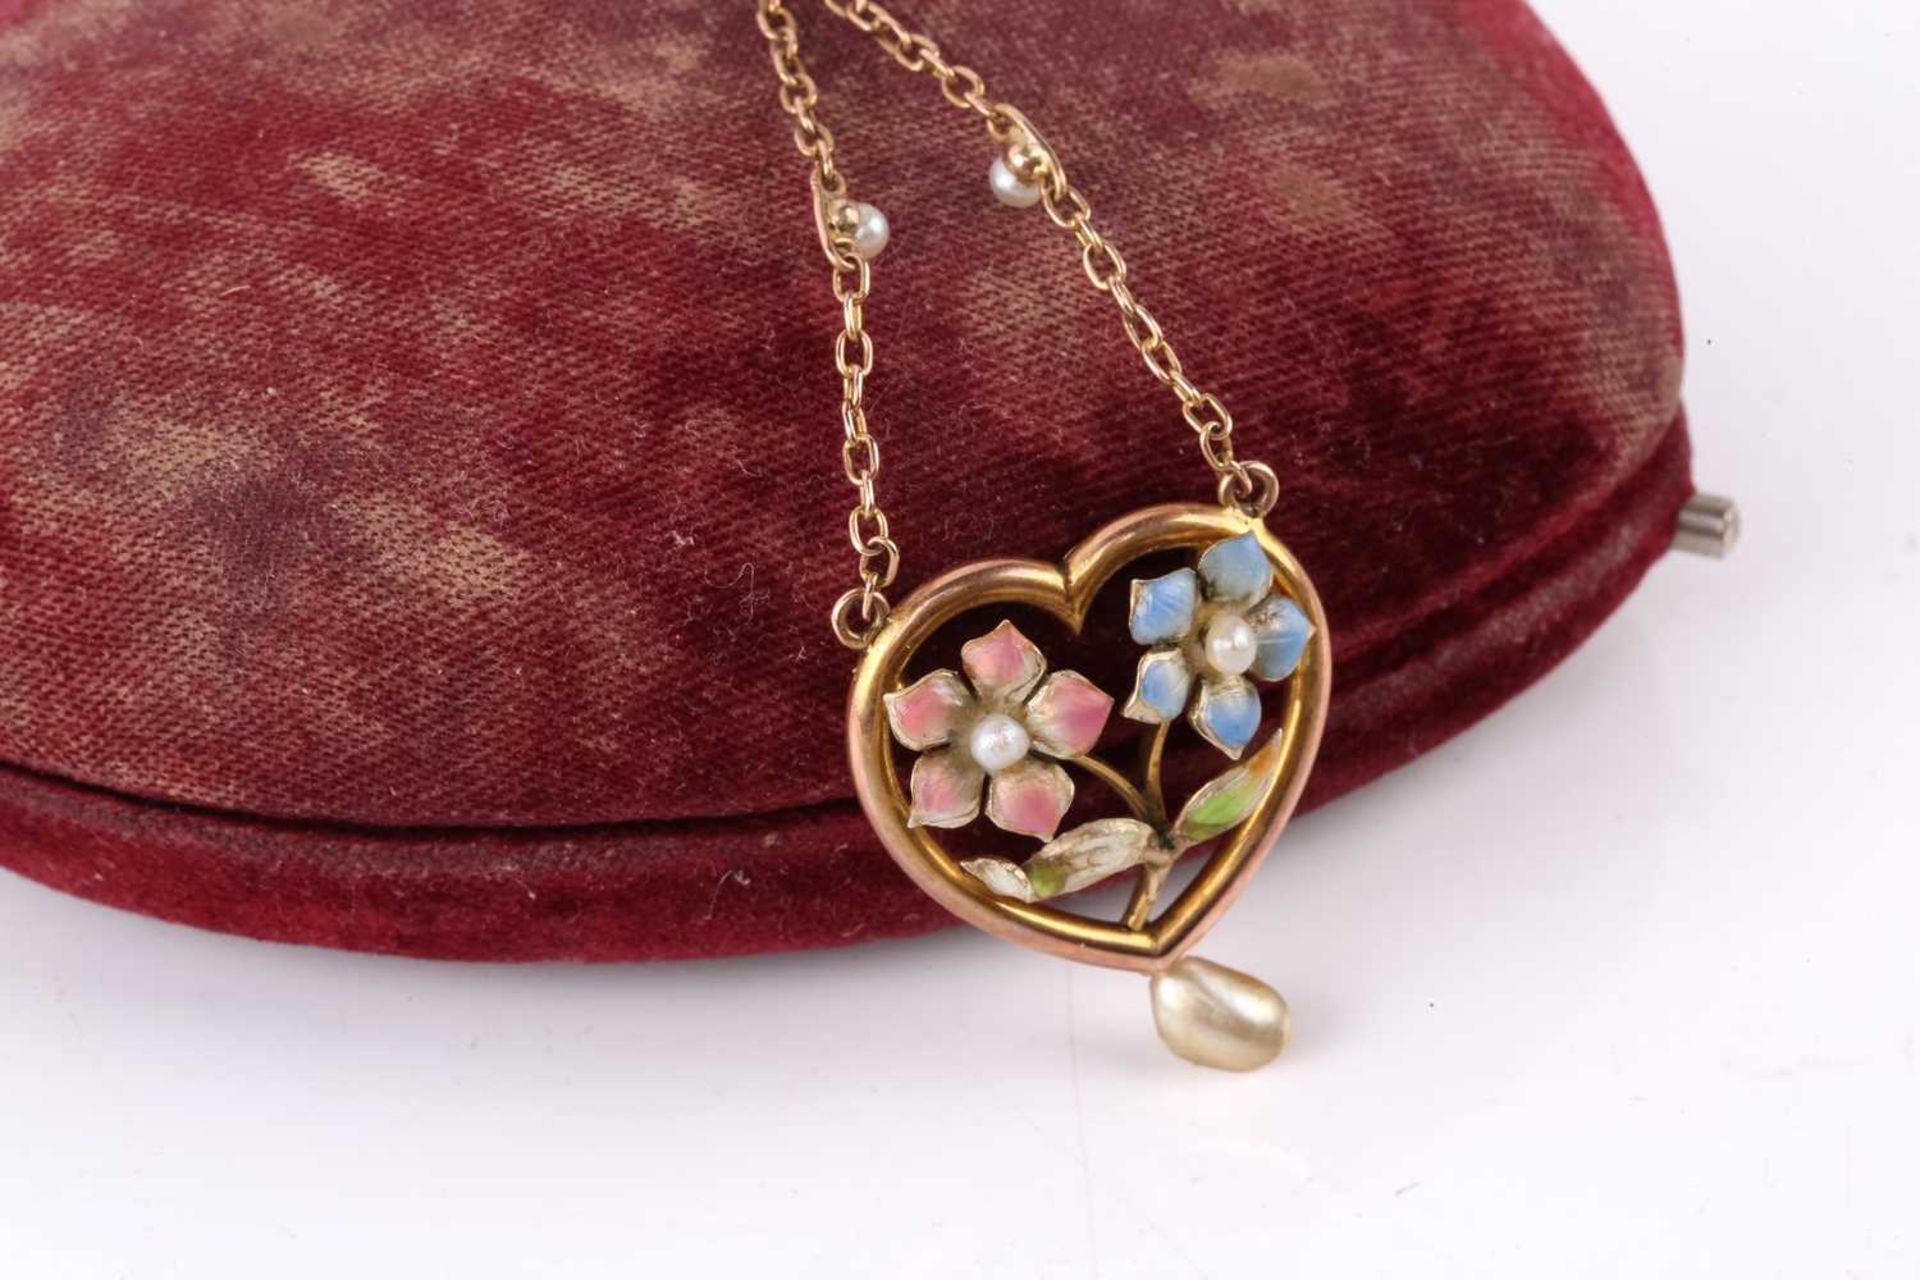 An Edwardian enamel and pearl floral pendant necklace designed as a heart with a spray of flowers in - Image 6 of 8